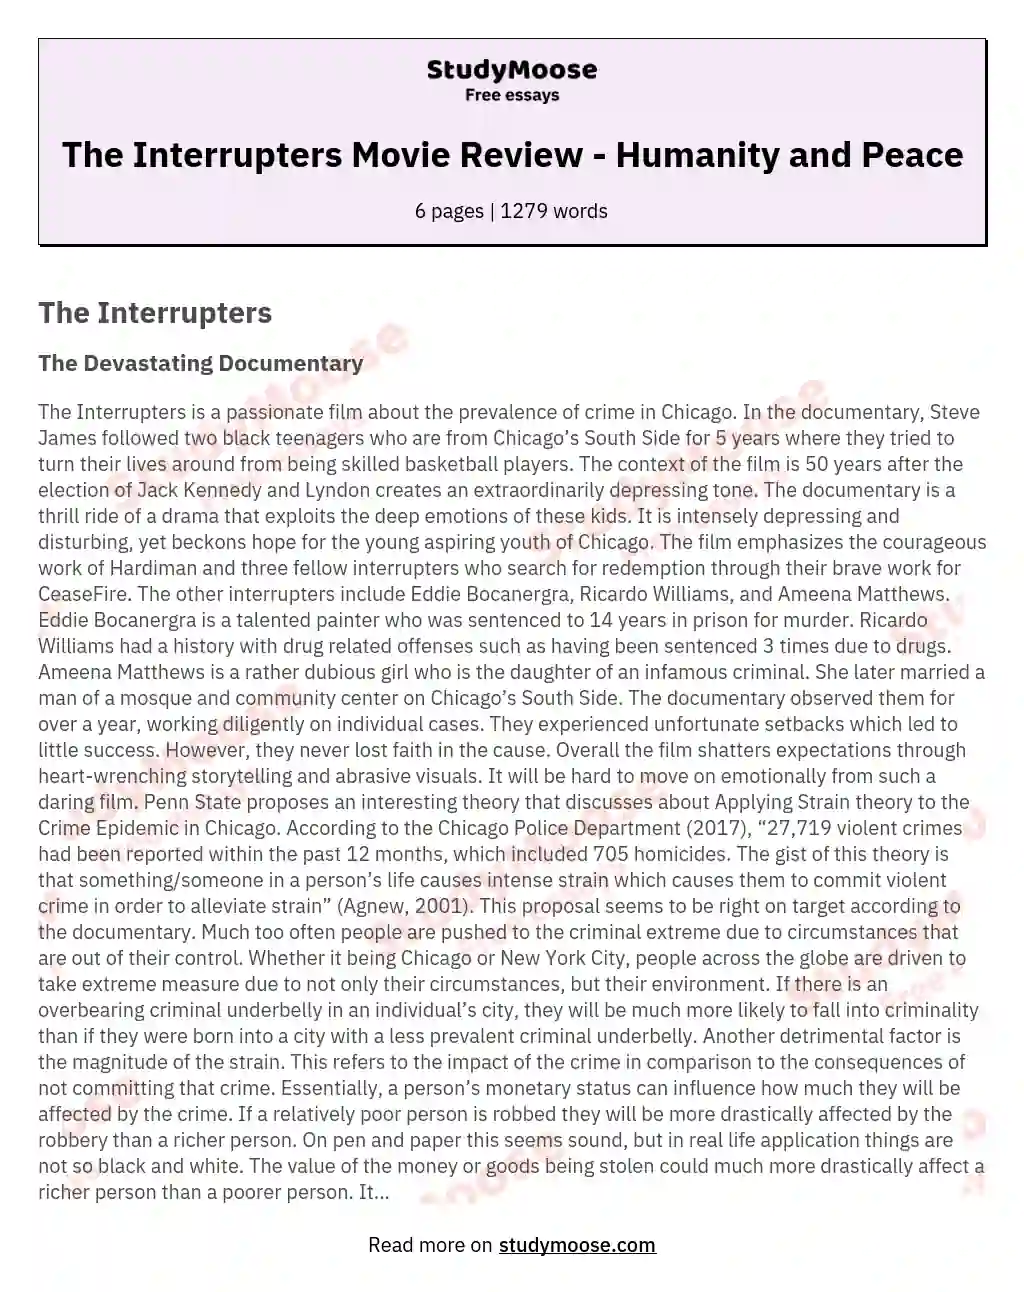 The Interrupters Movie Review - Humanity and Peace essay